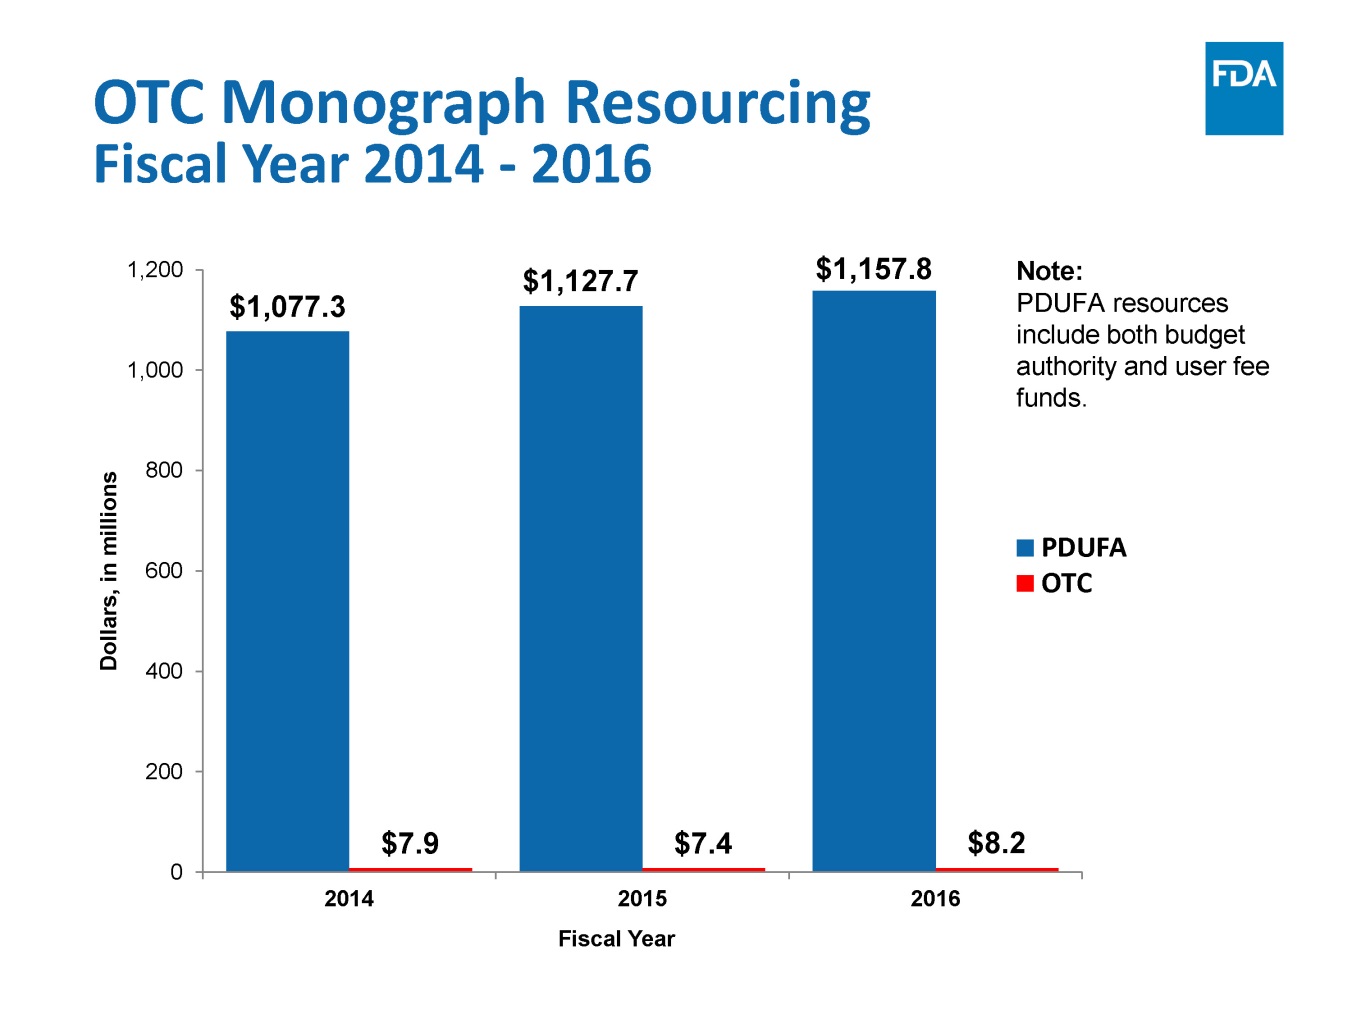 OTC monograph resourcing Fiscal Year 2014 - 2016